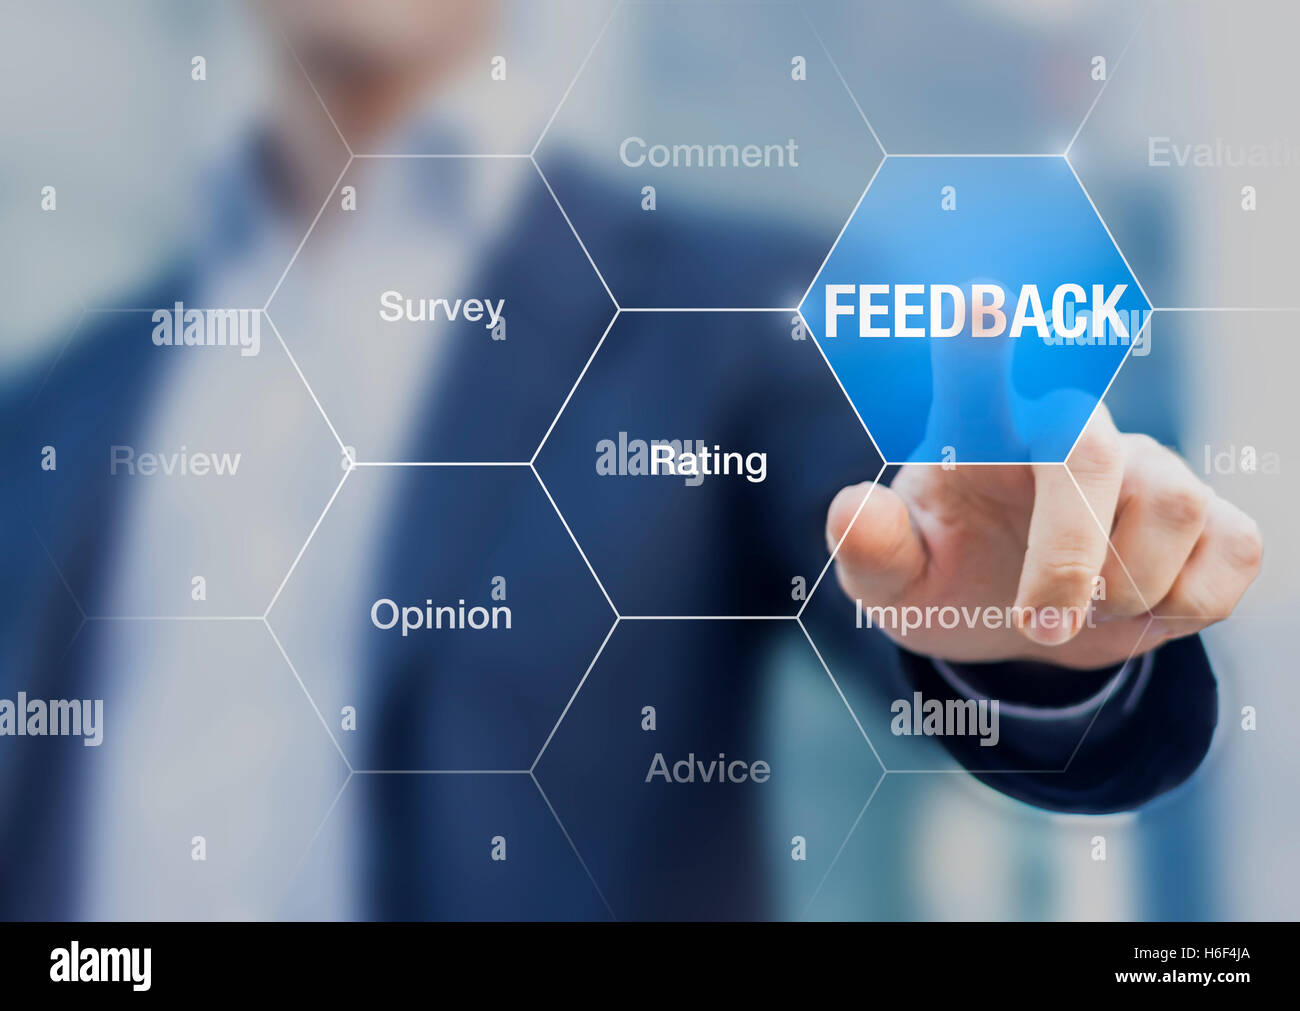 Feedback button, concept about customer opinion, comment, review and rating Stock Photo